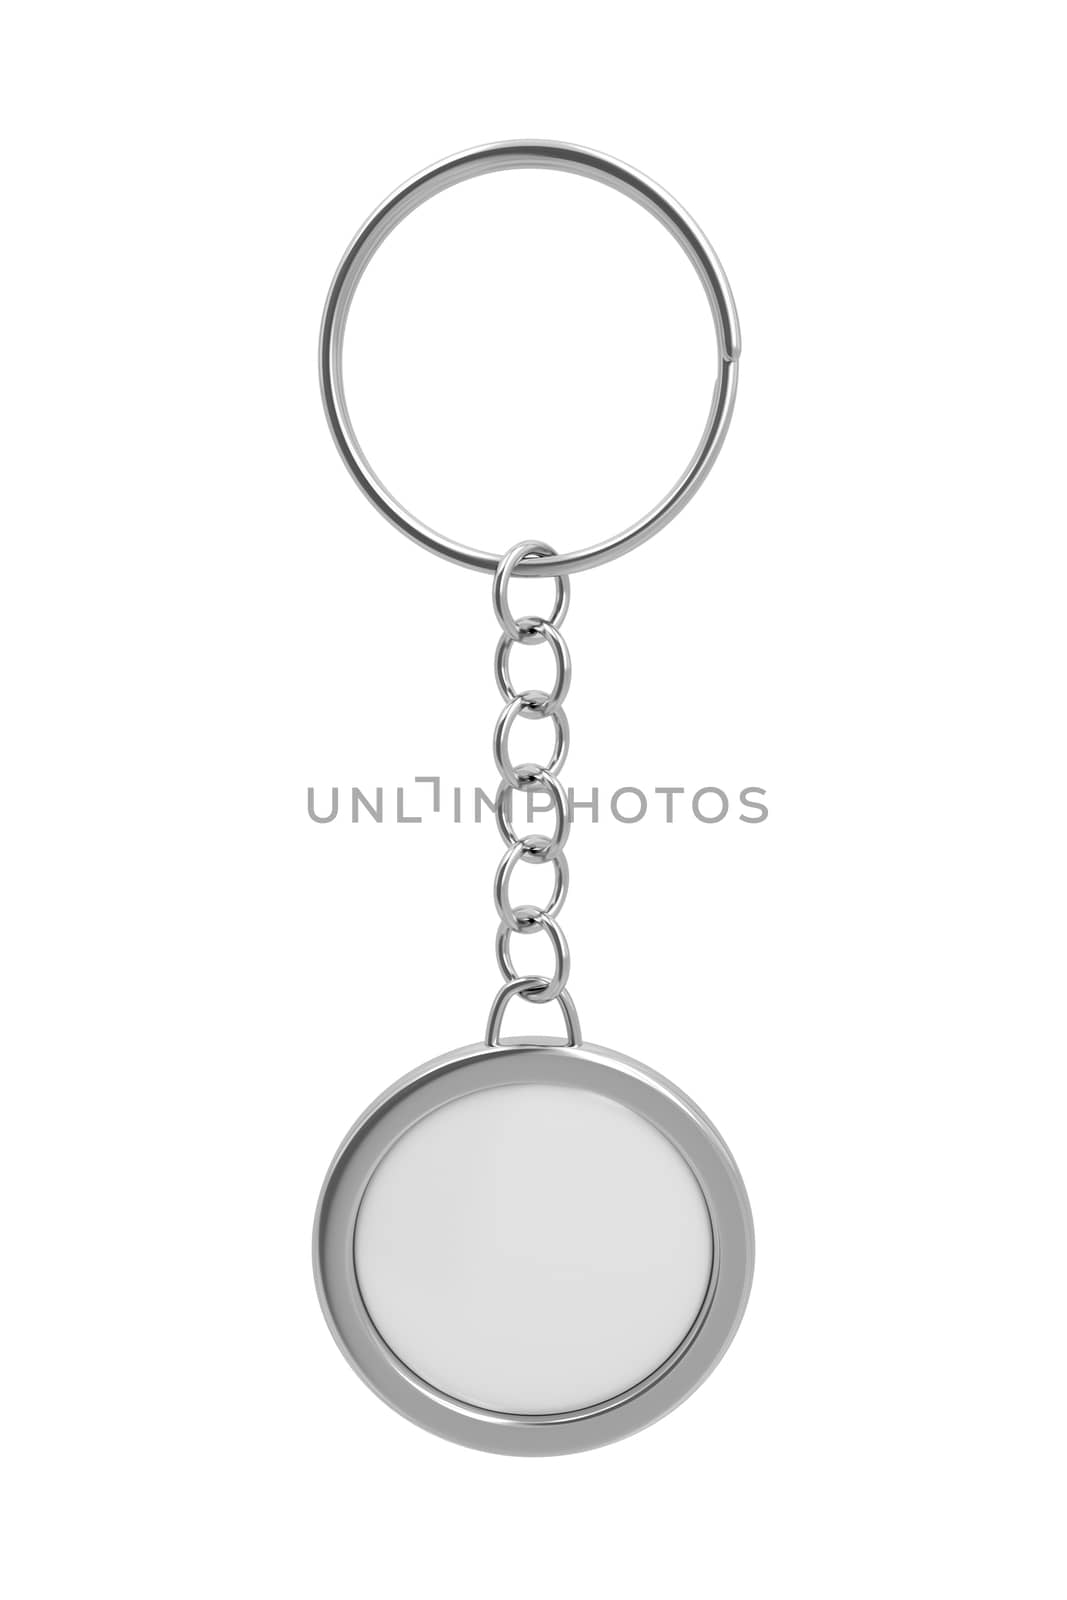 Key ring by magraphics